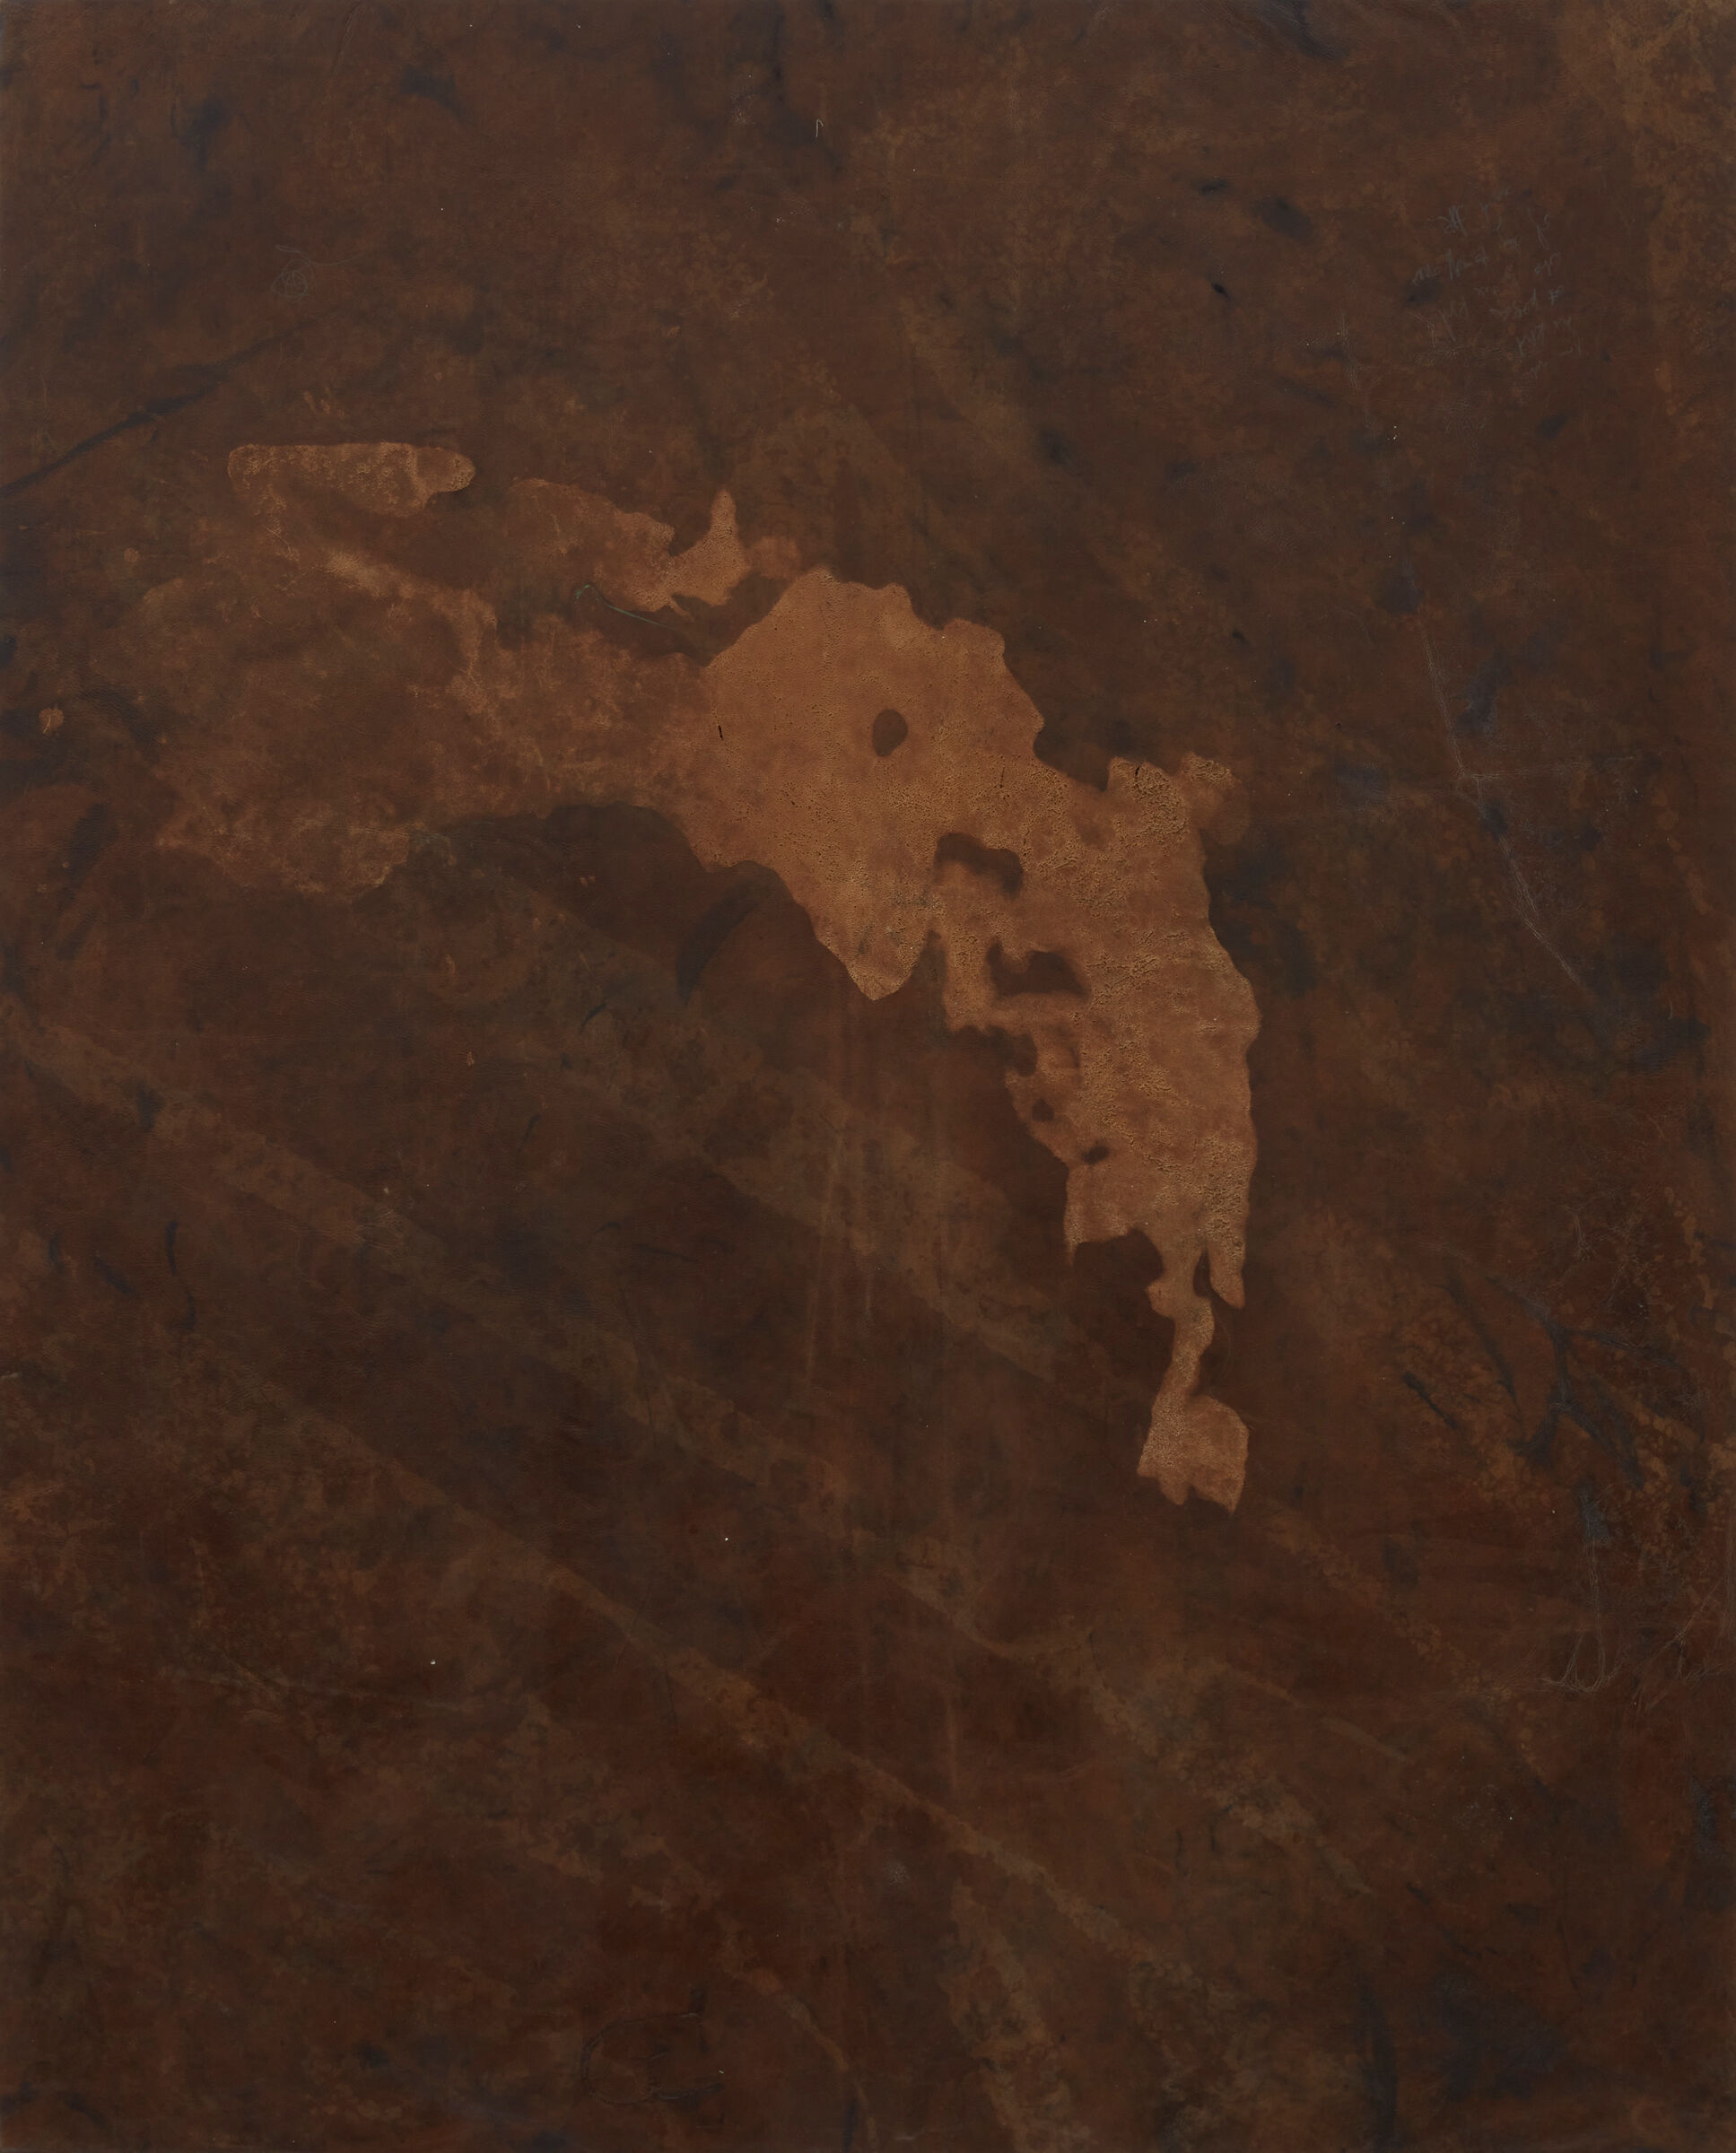 Abstract splotches of brown hues on wrinkled leather.